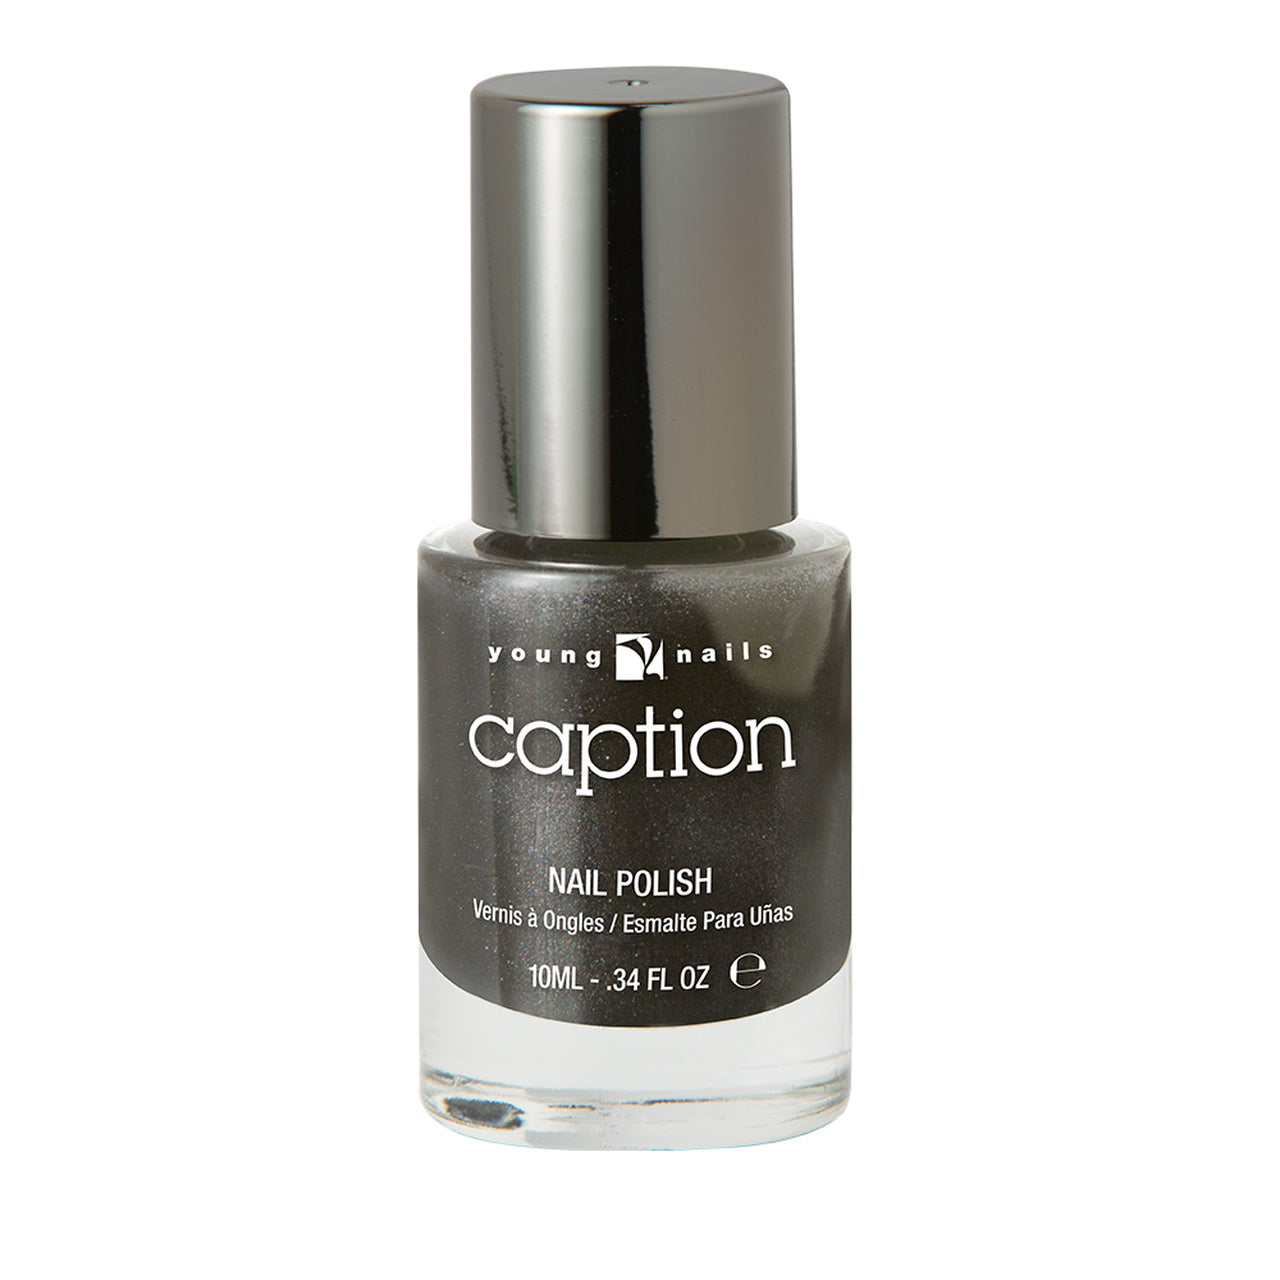 YOUNG NAILS CAPTION NAIL POLISH DUST YOURSELF OFF .5oz